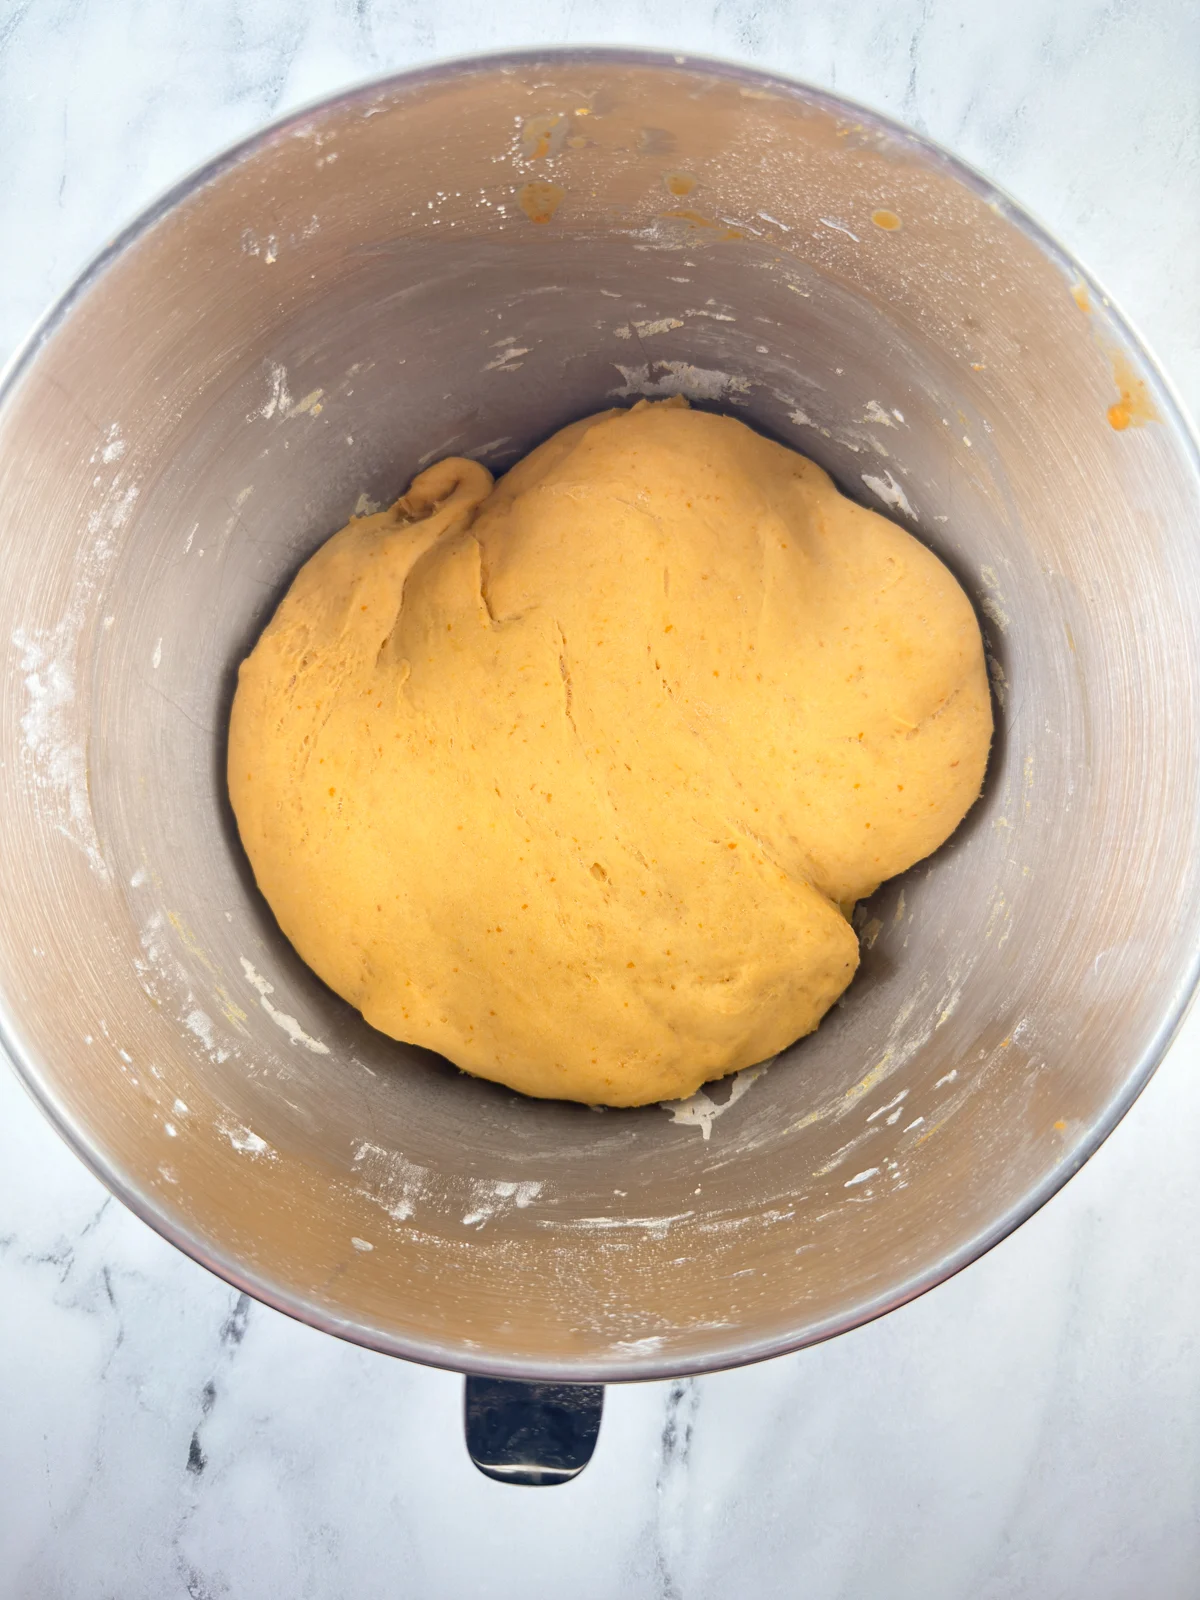 Dough in stand mixer bowl after it has risen.